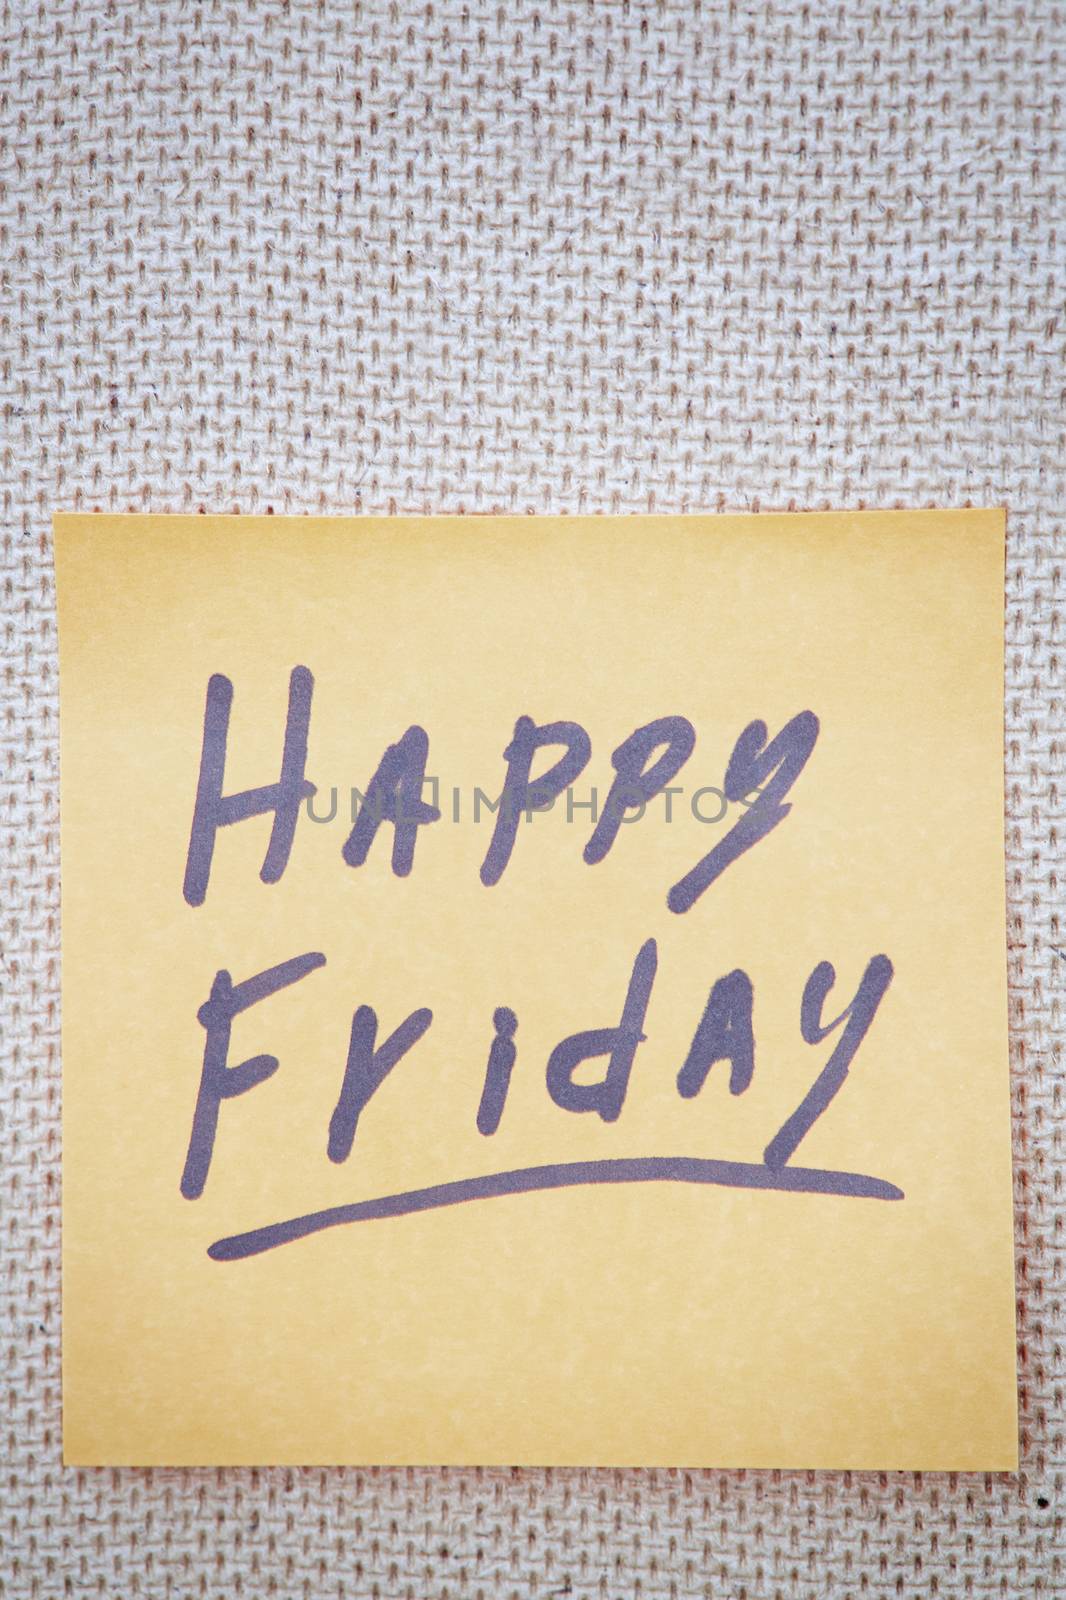 Adhesive note with Happy Friday text on a cork bulletin board